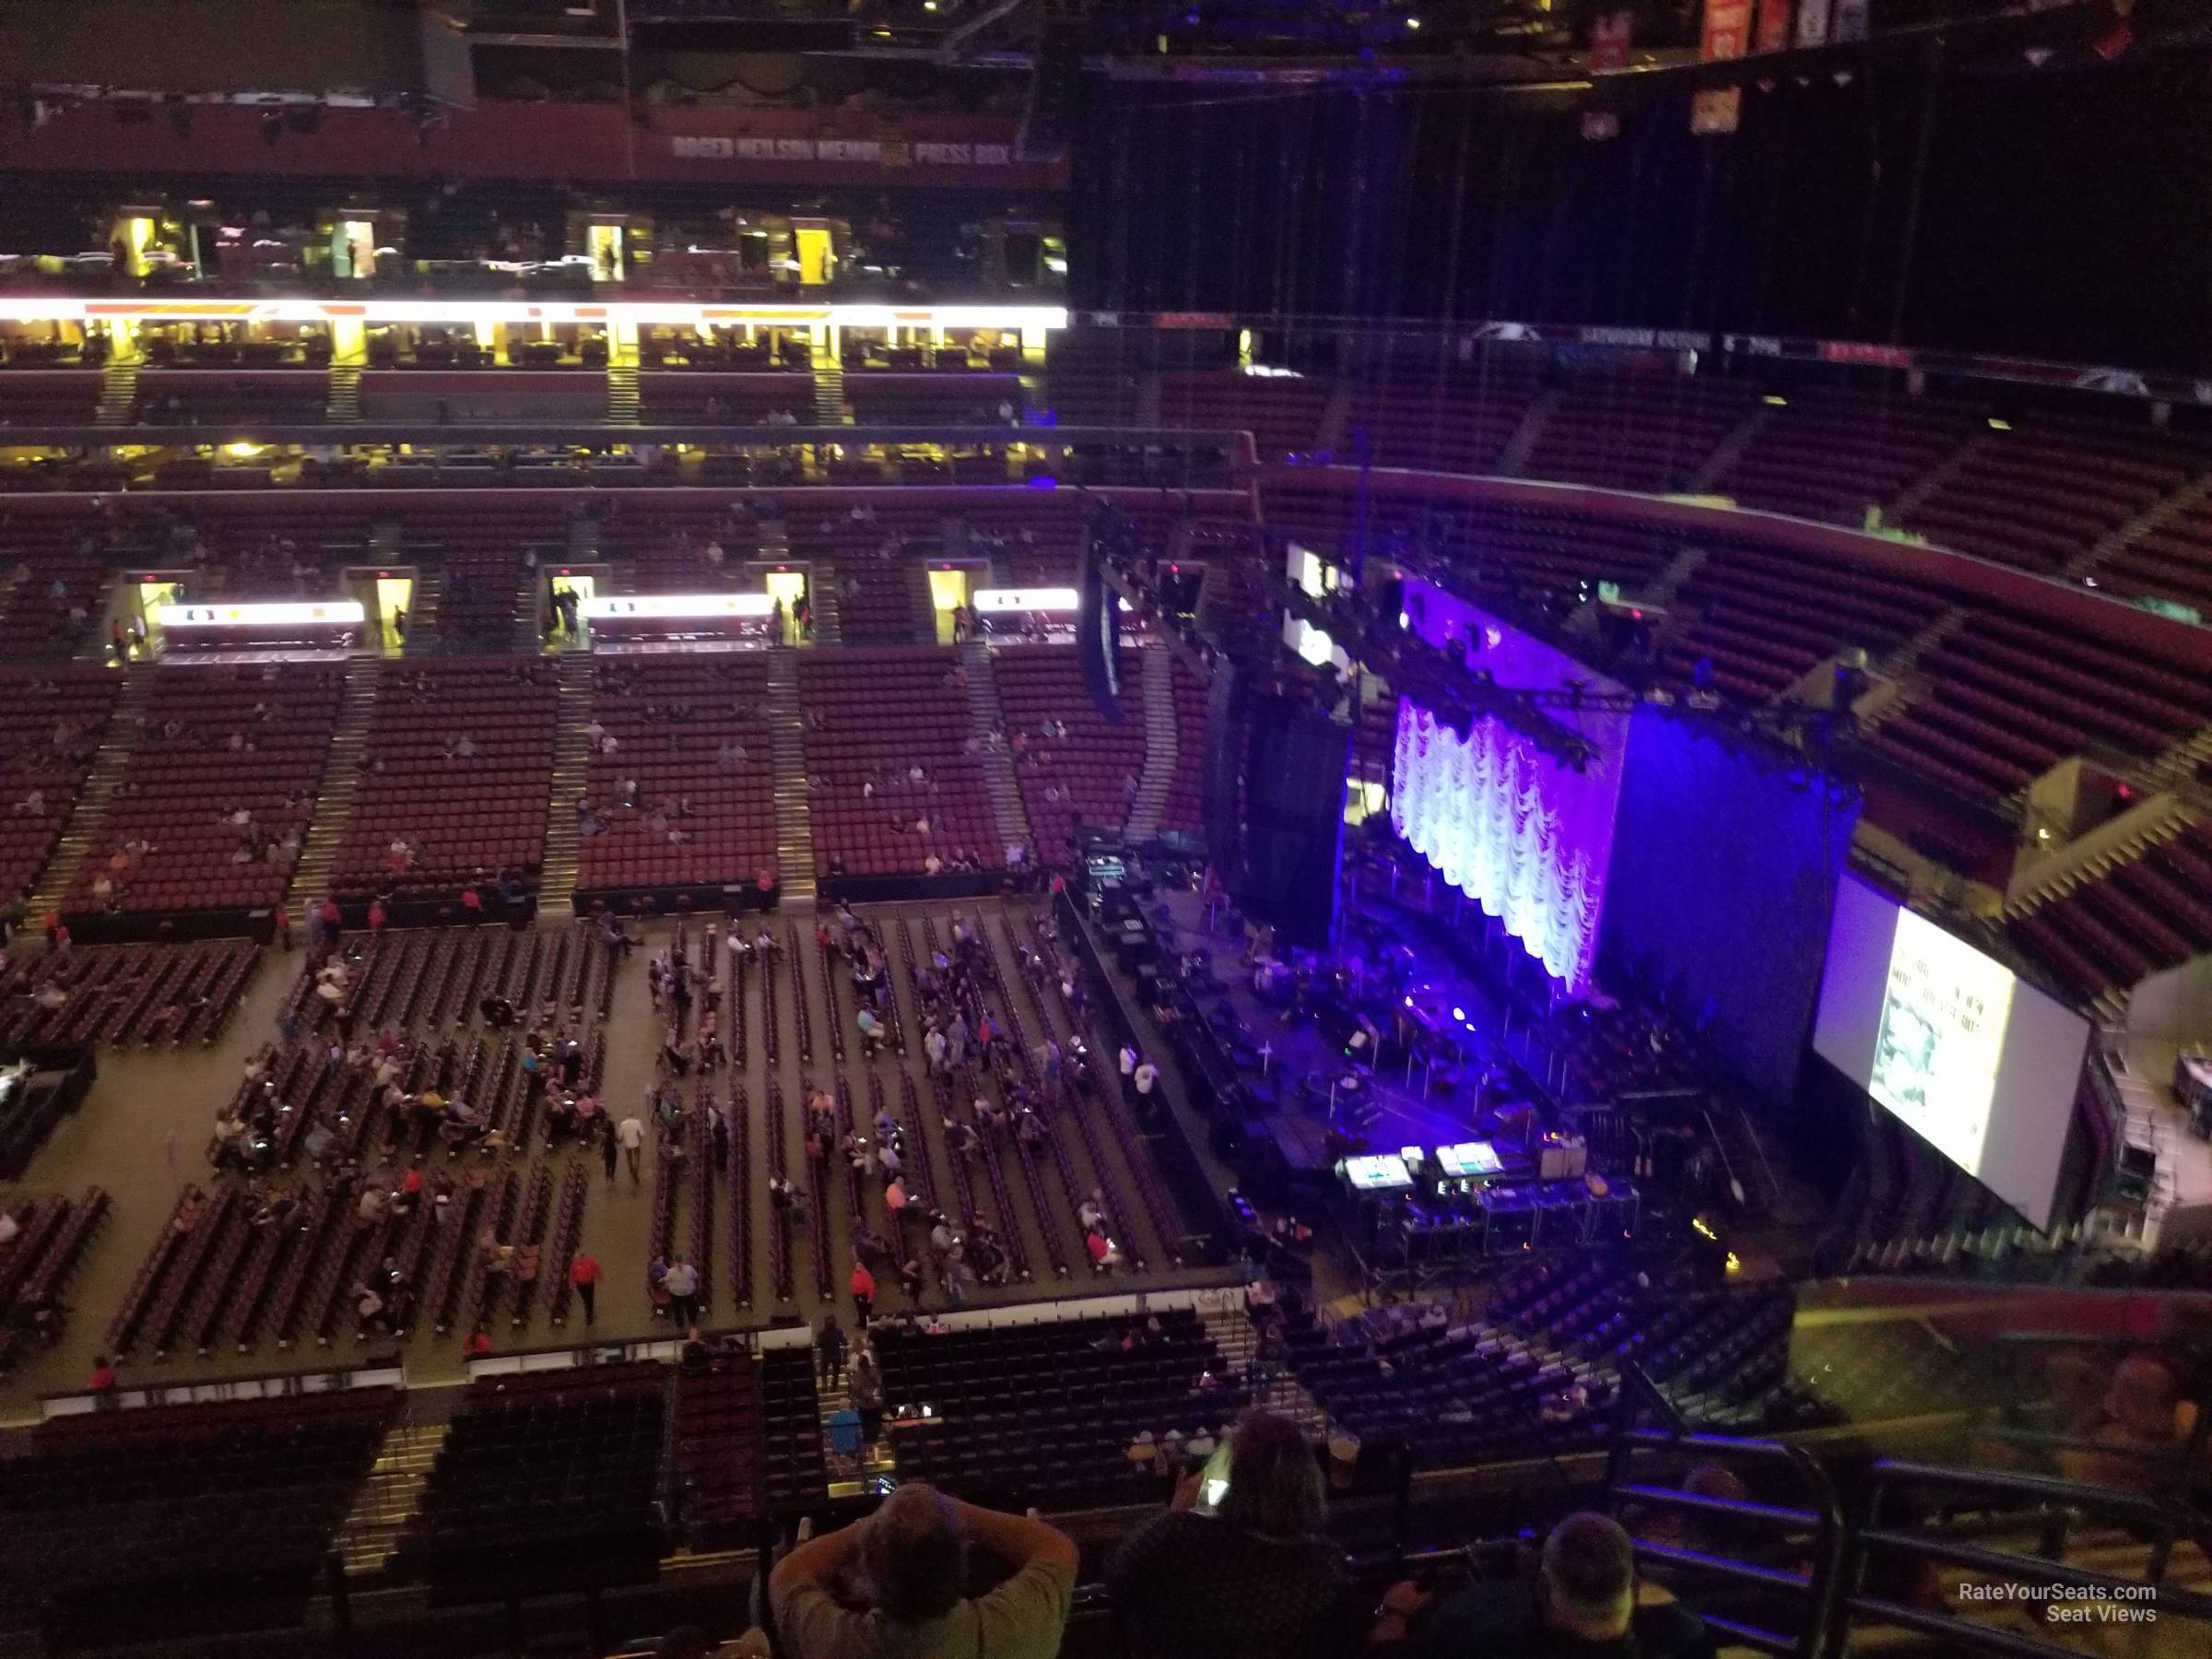 Section 334 at BB&T Center for Concerts